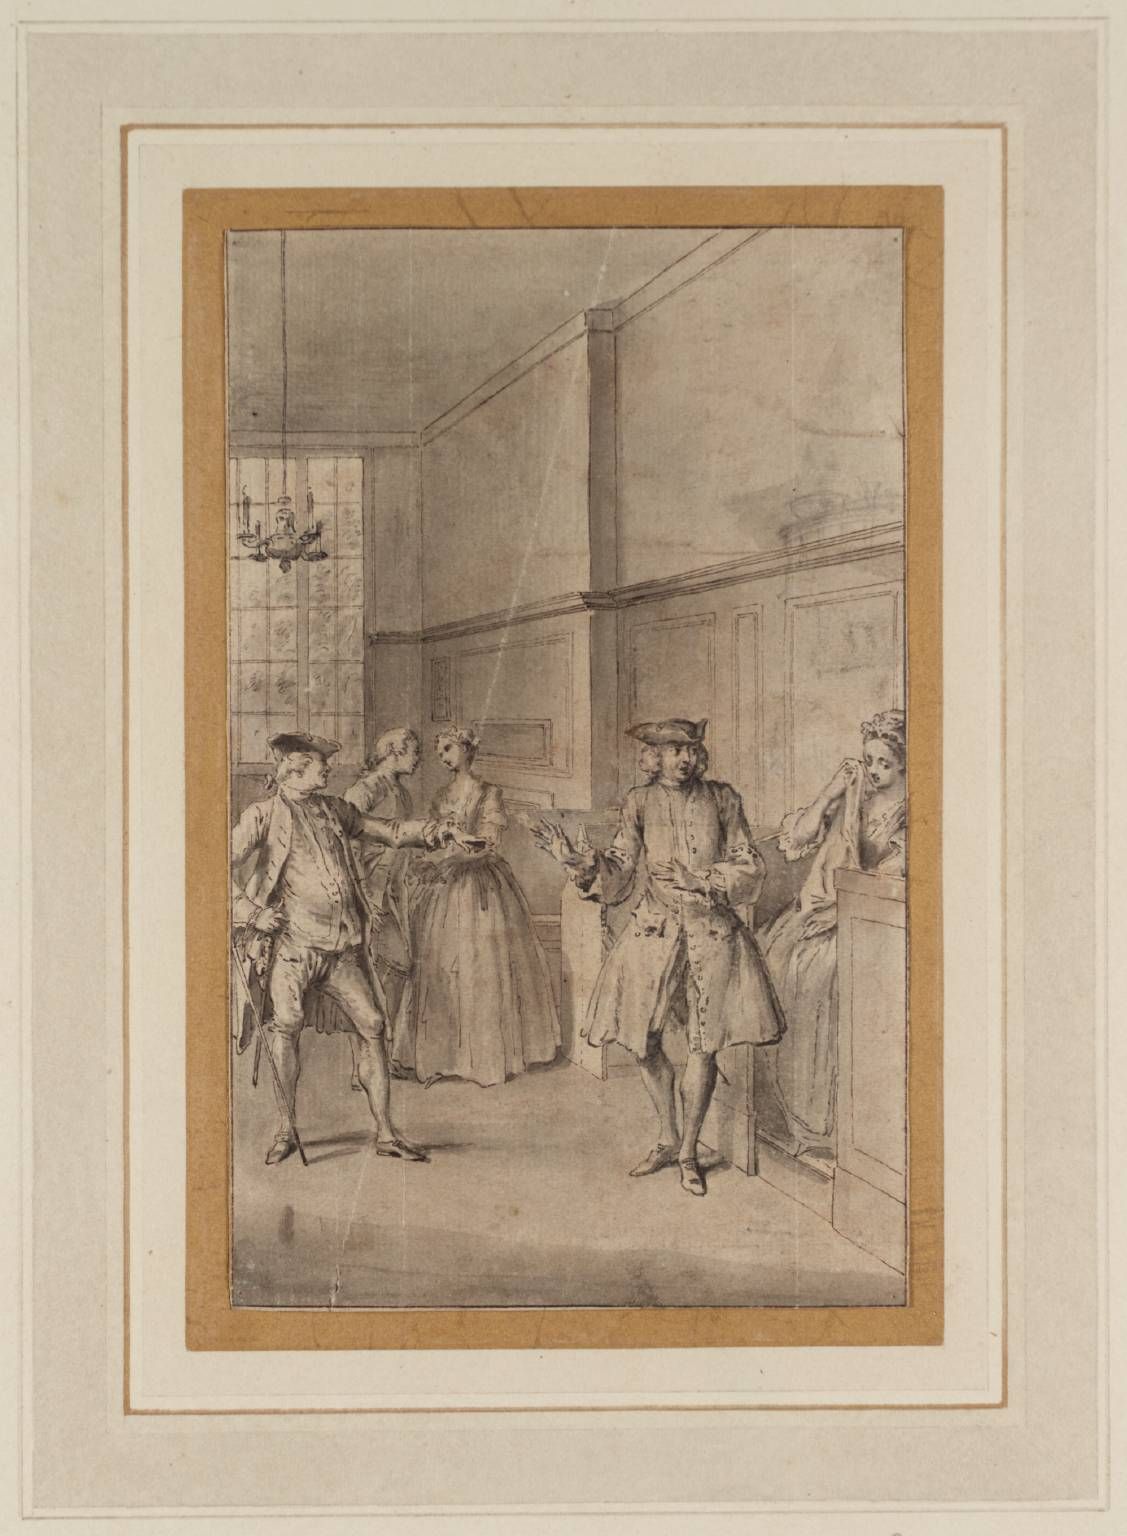 Ink and watercolour artwork of men in 17th century dress wearing waistcoats, long stockings, and hats, talking to each other animatedly